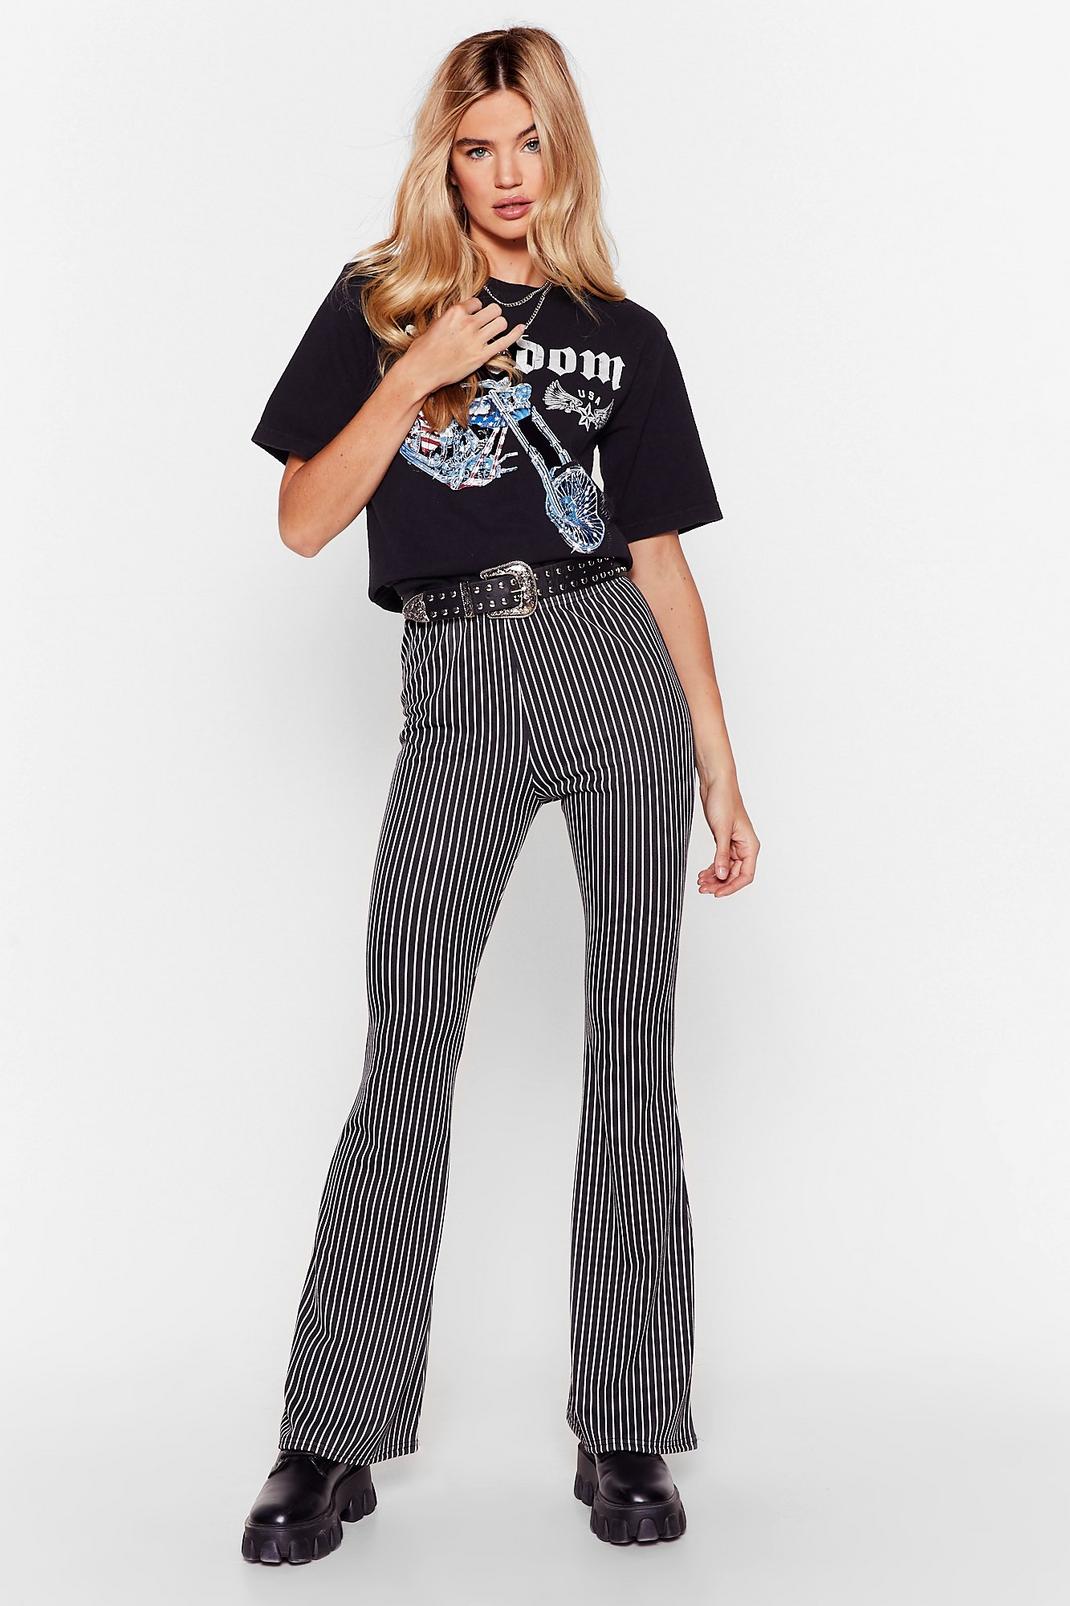 Black and White Striped Flare Pants